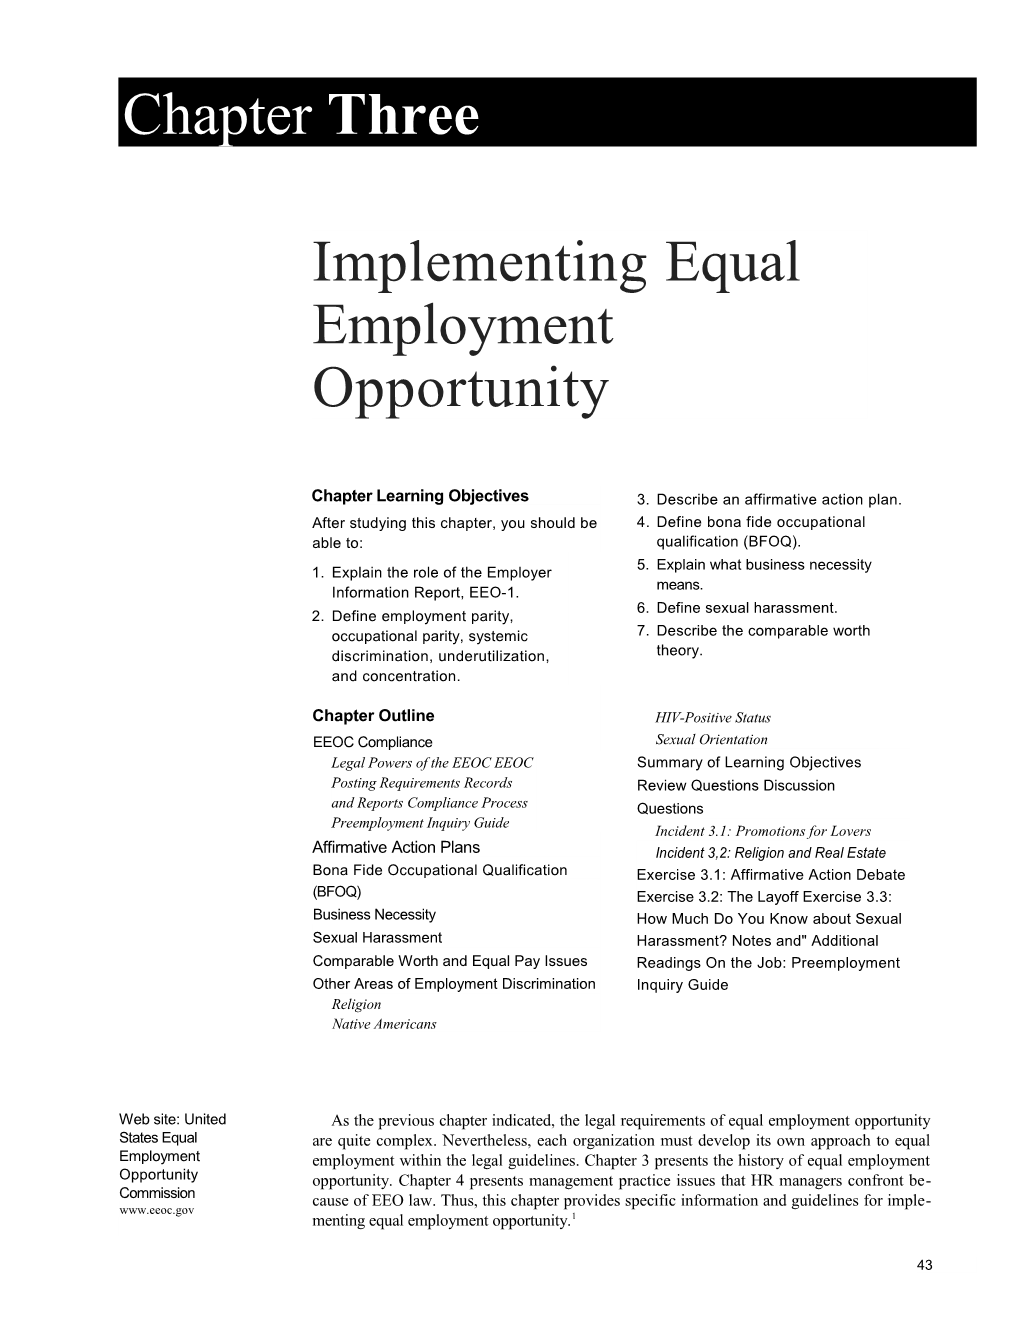 Implementing Equal Employment Opportunity